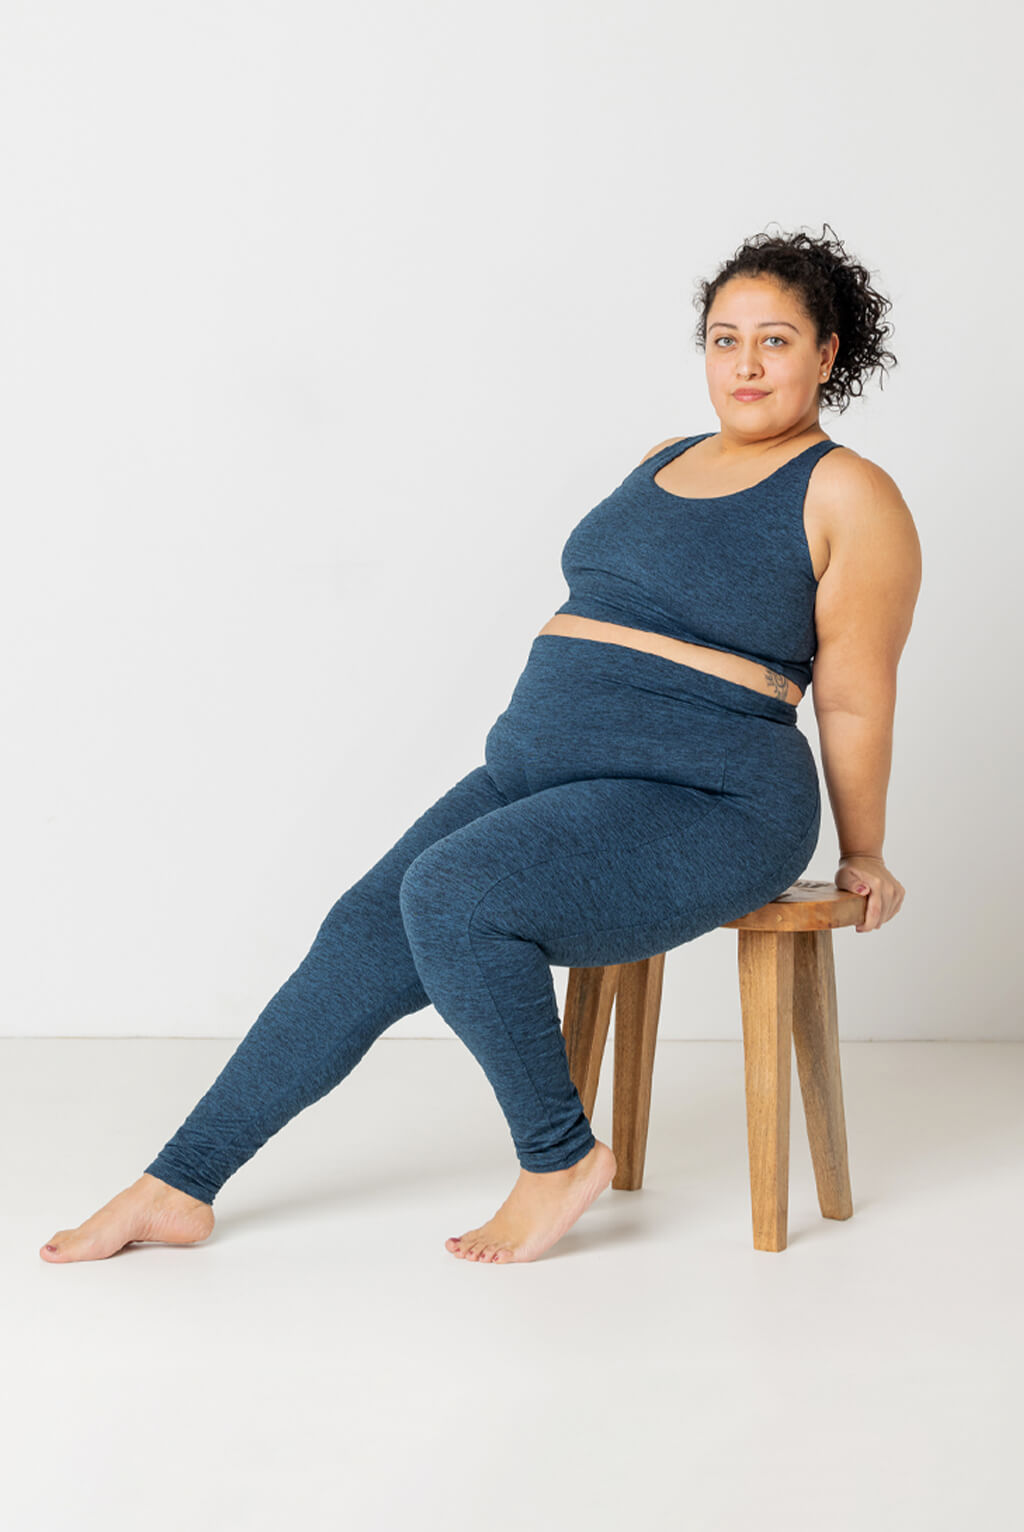 Plus size model sitting on wooden chair wearing Superfit Hero SuperSoft leggings in Heather Navy